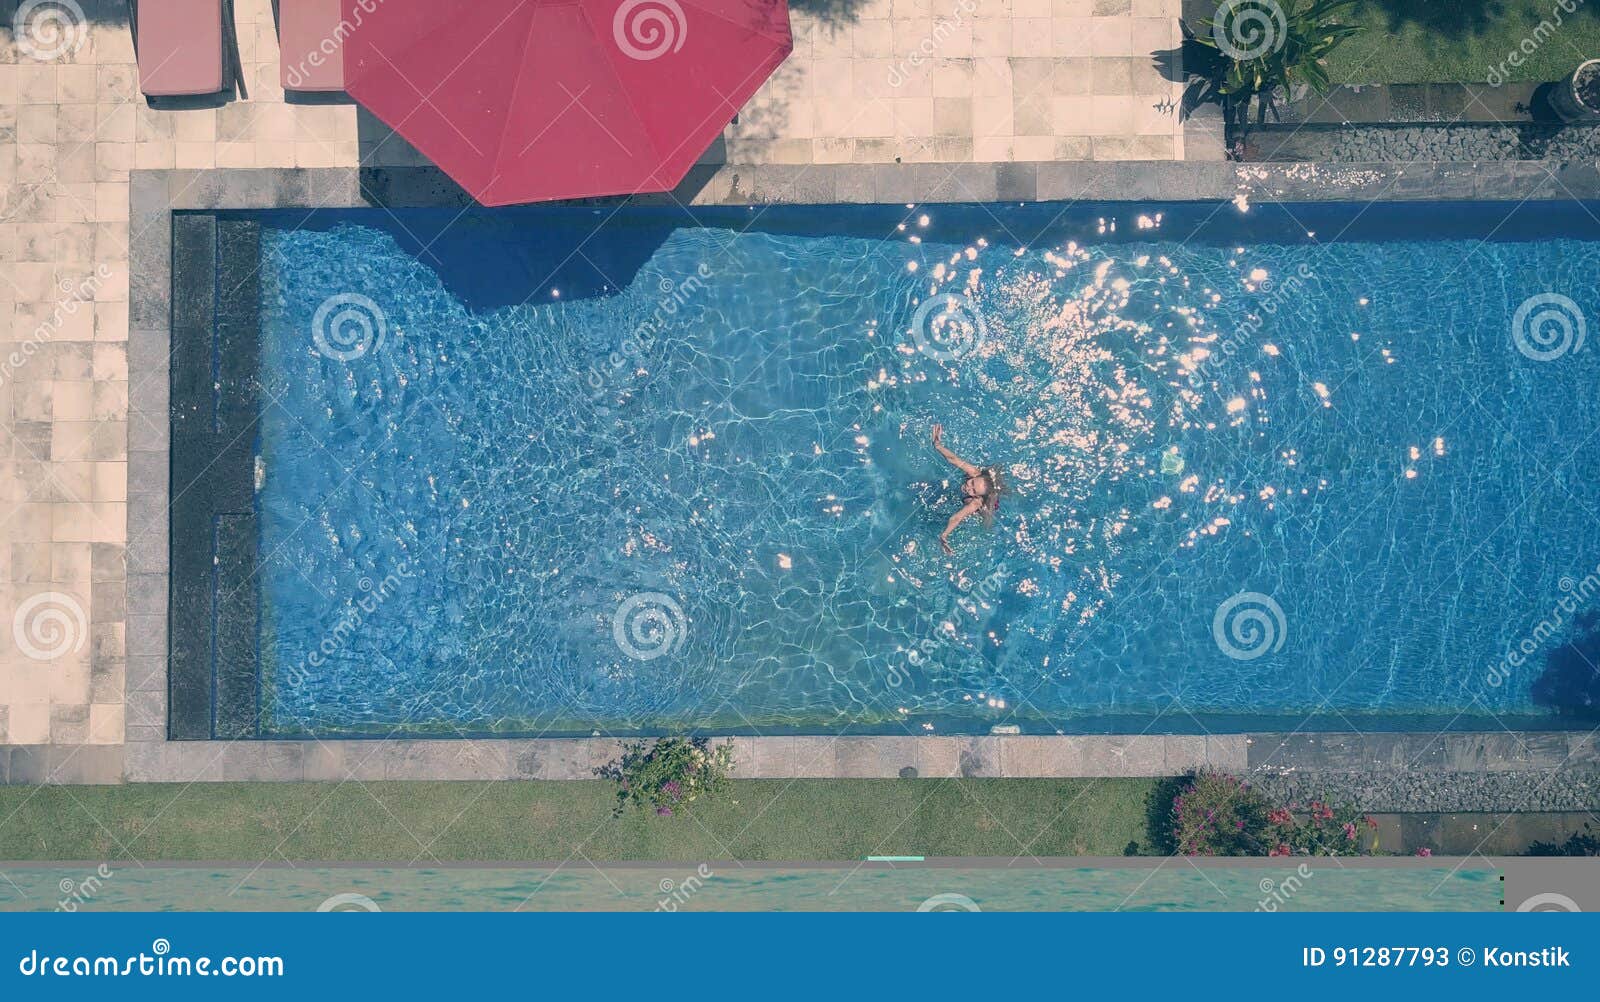 the young beautiful woman in the pool, flat lay, dron view, retro effect